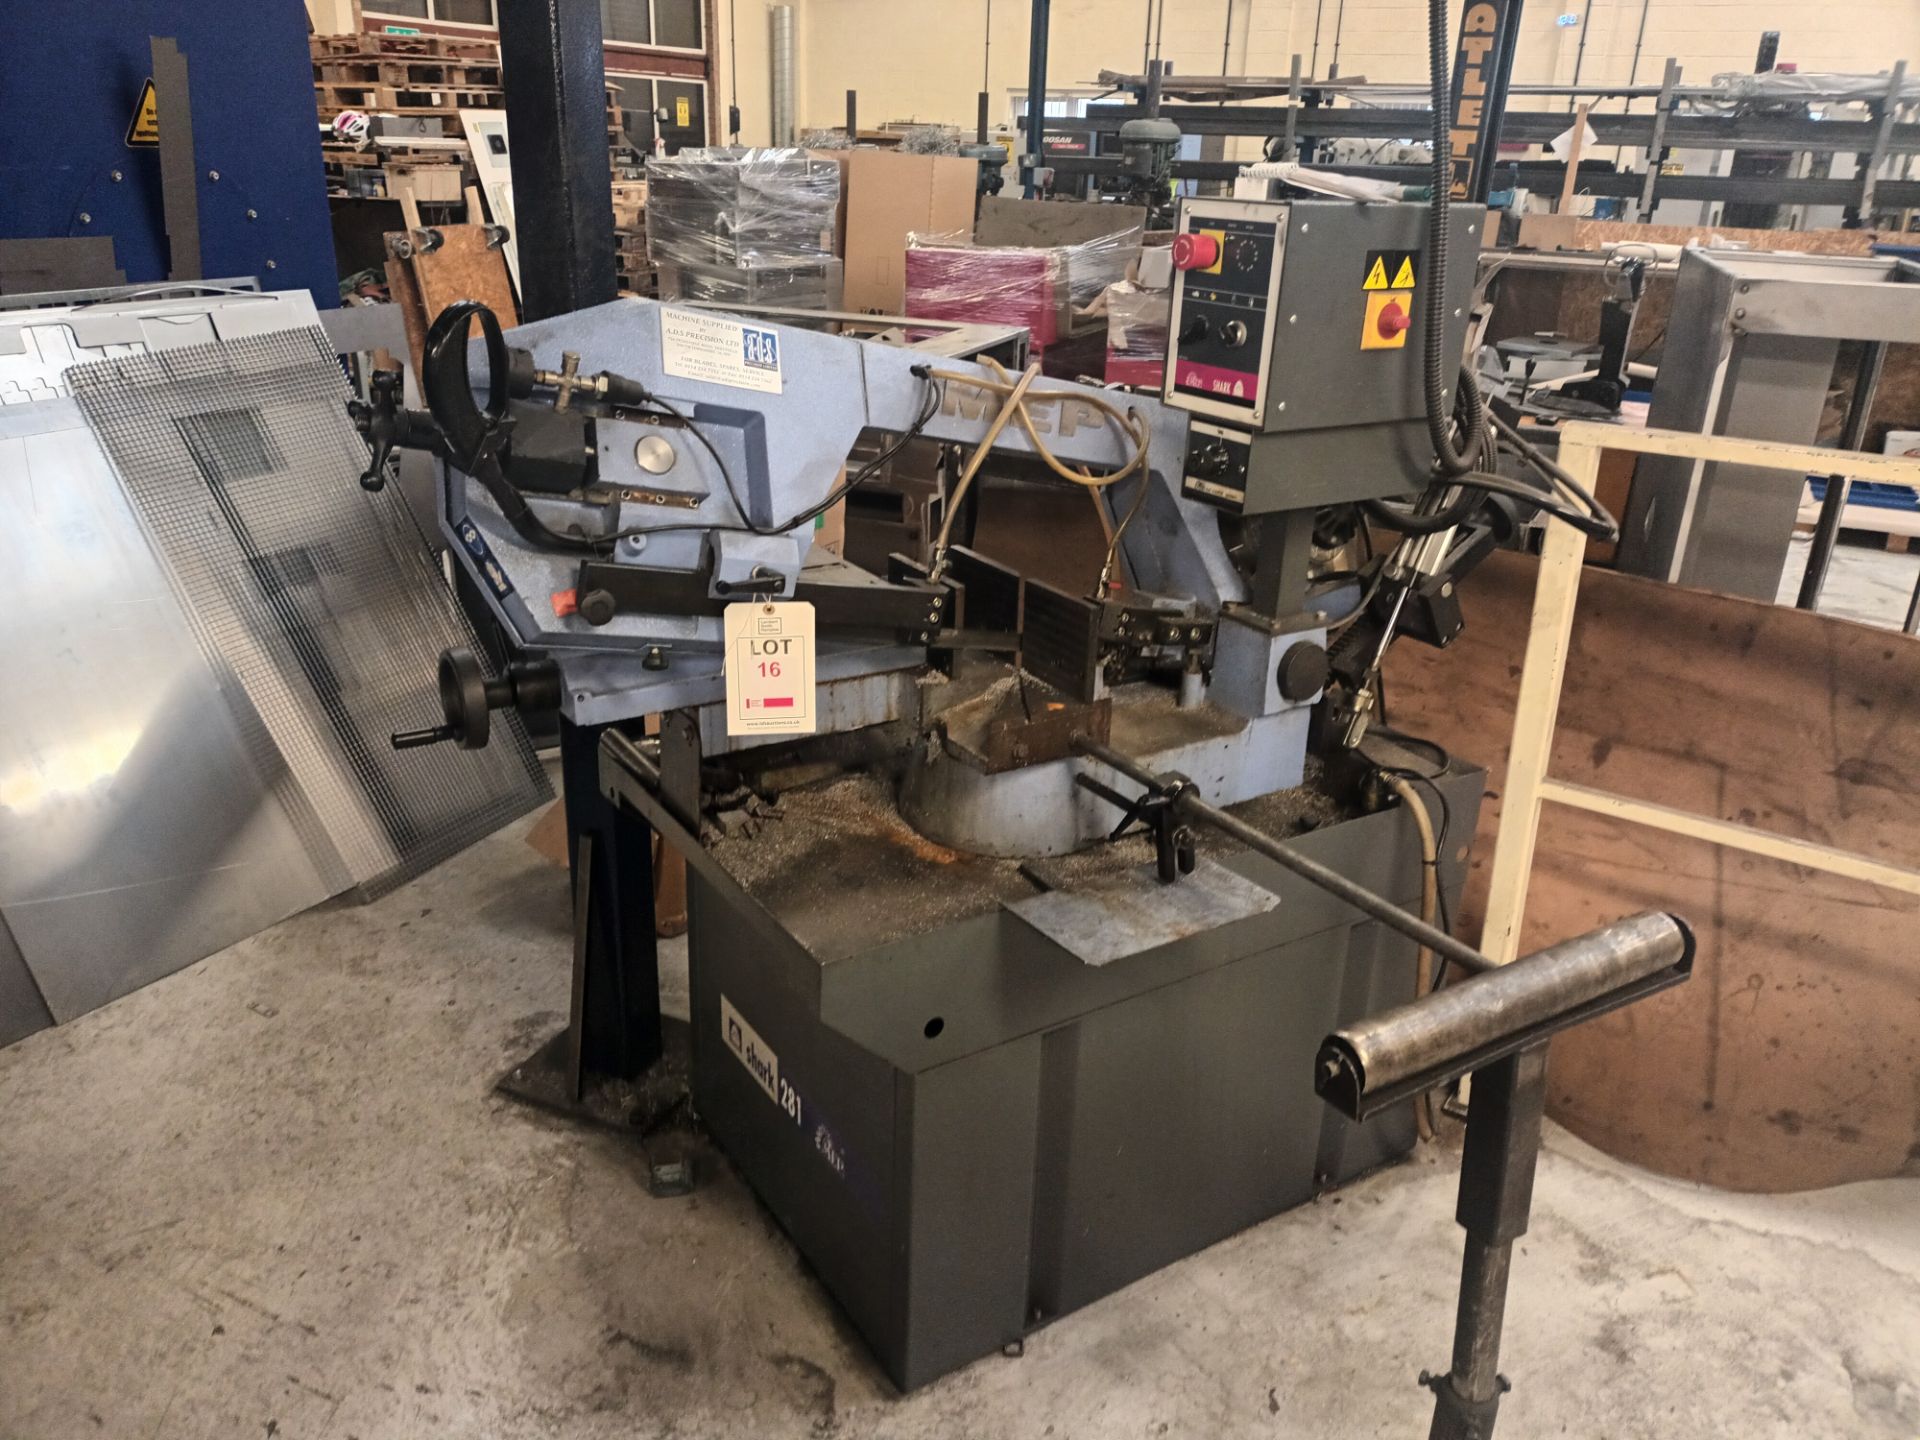 MEP shark 281 band saw with table feed